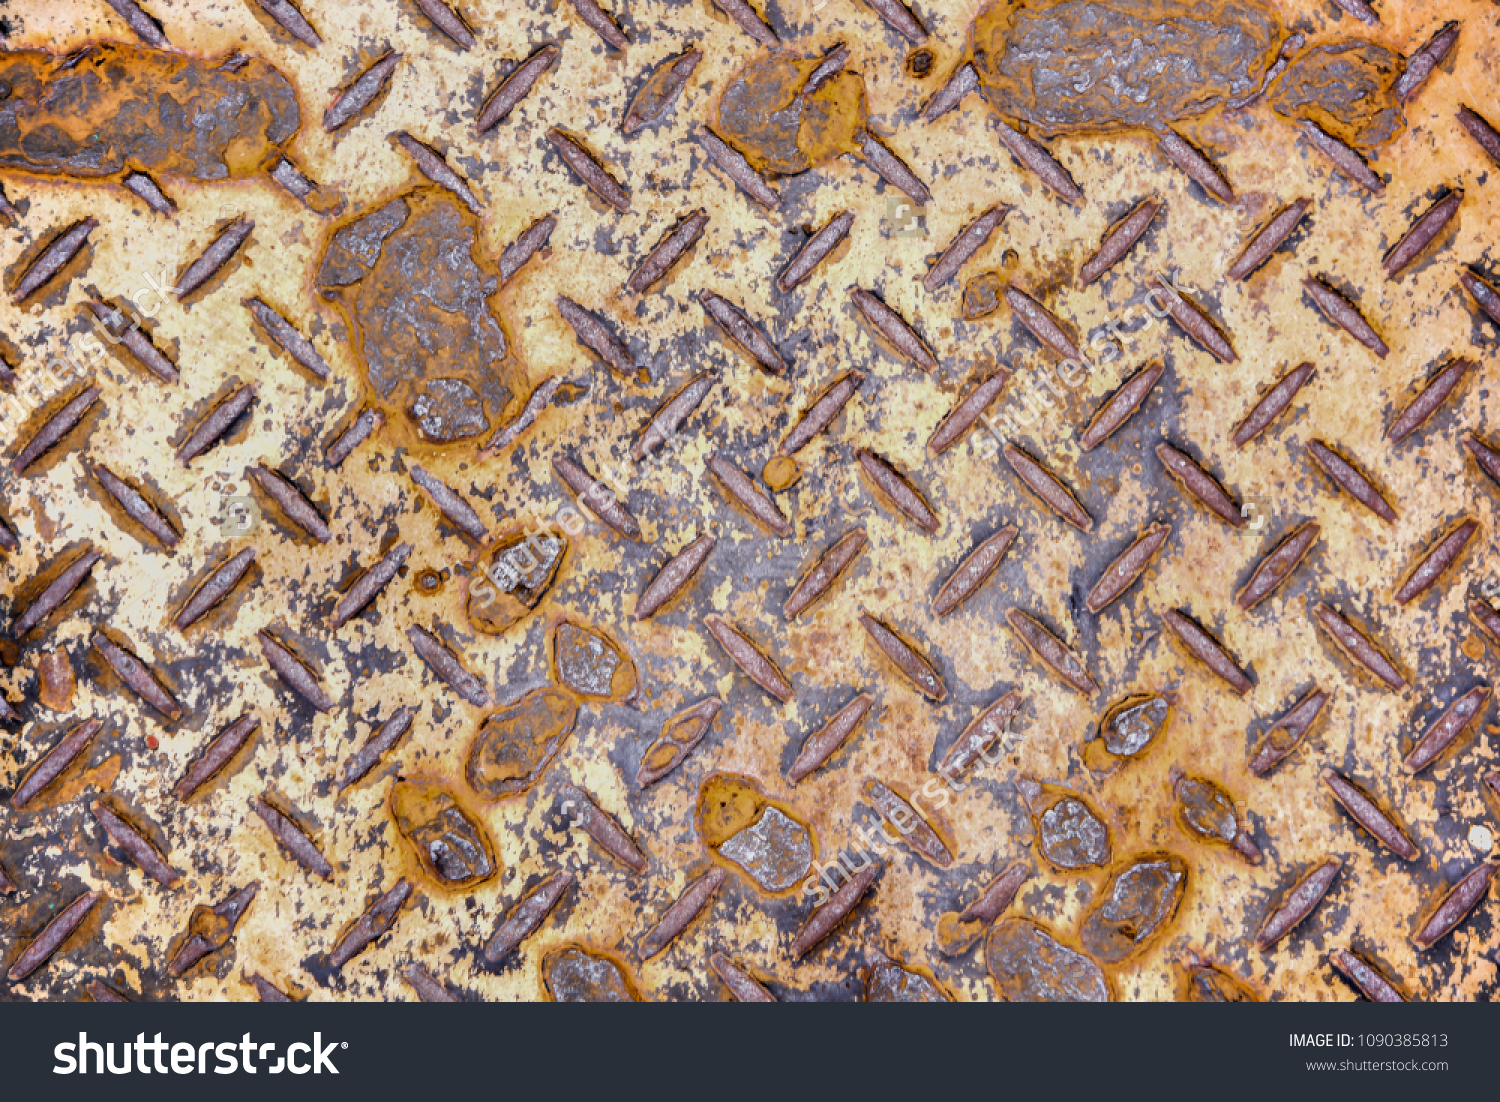 Steel plate slip old dirty metal surfaces rough. rusty sheet pattern texture background with rhombus shapes. #1090385813